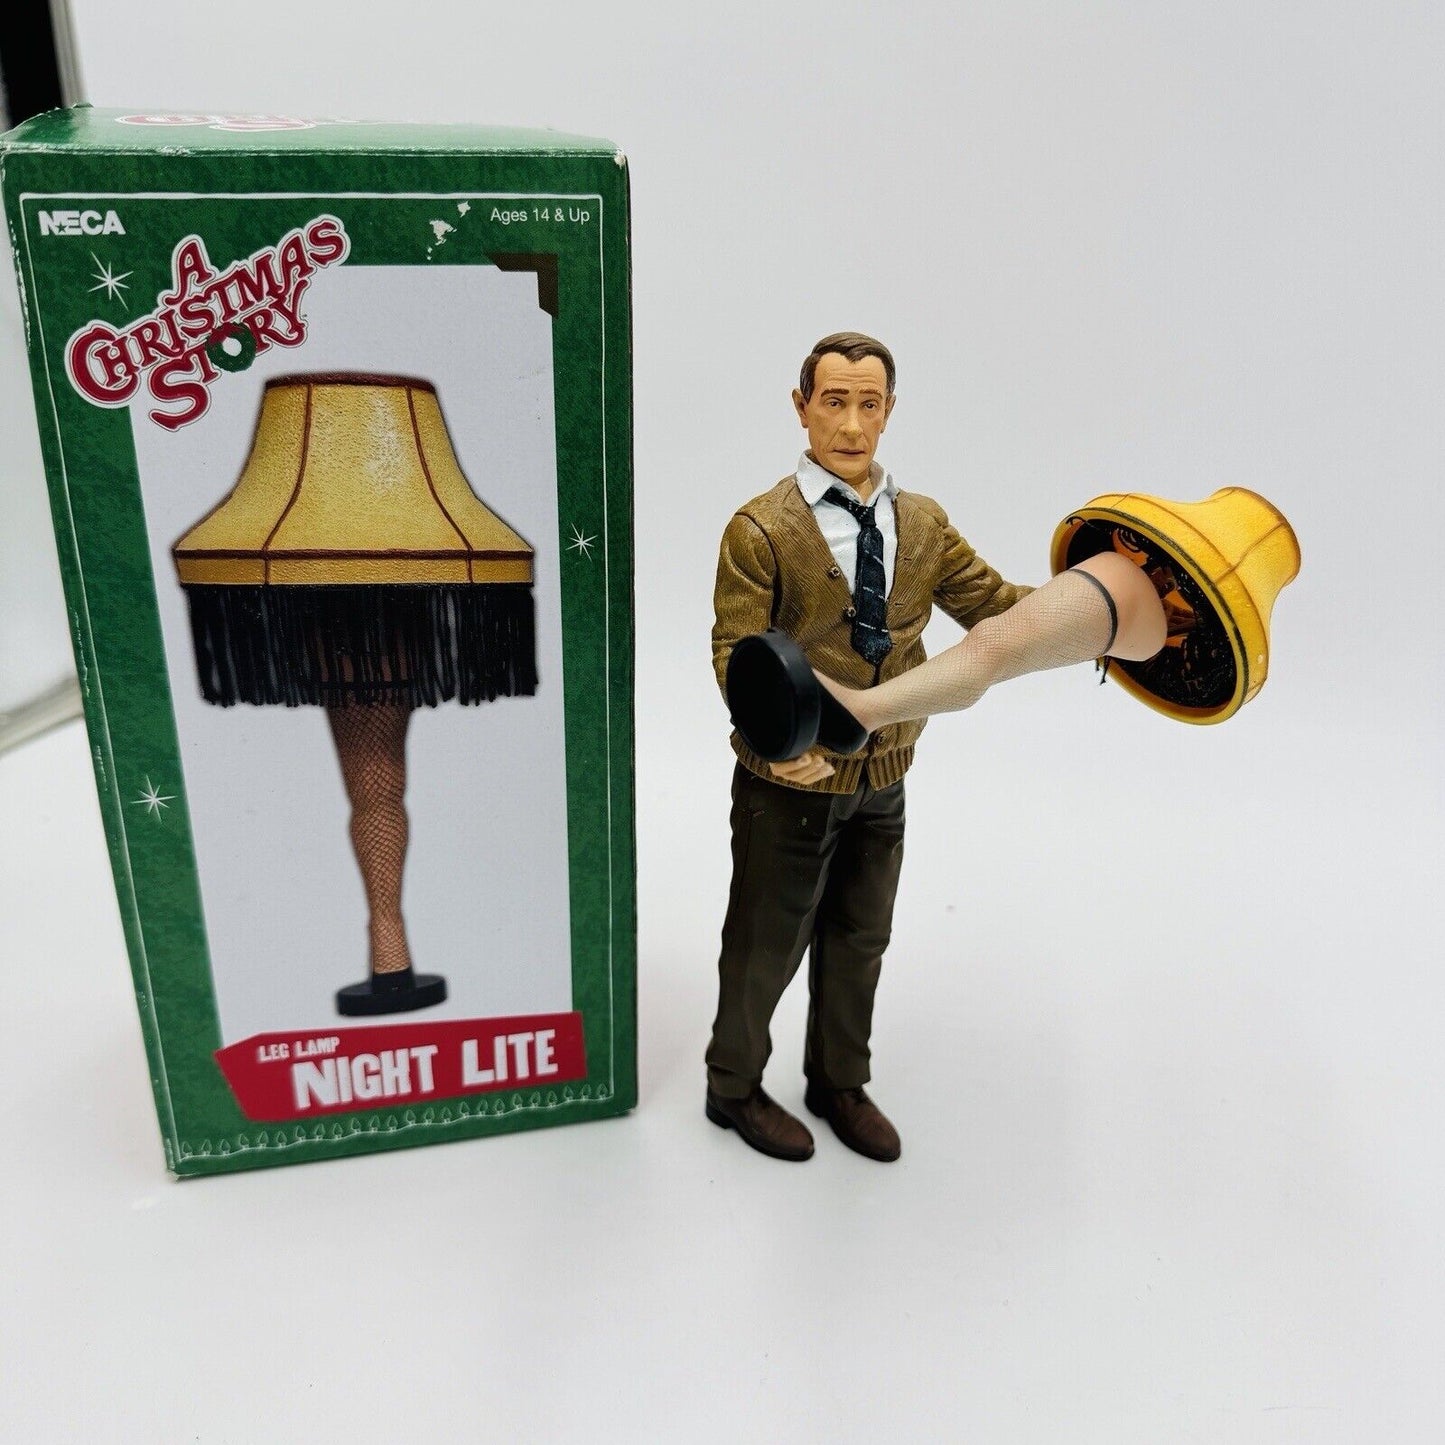 NECA A Christmas Story The Old Man Figure And Toy Leg Lamp 2008